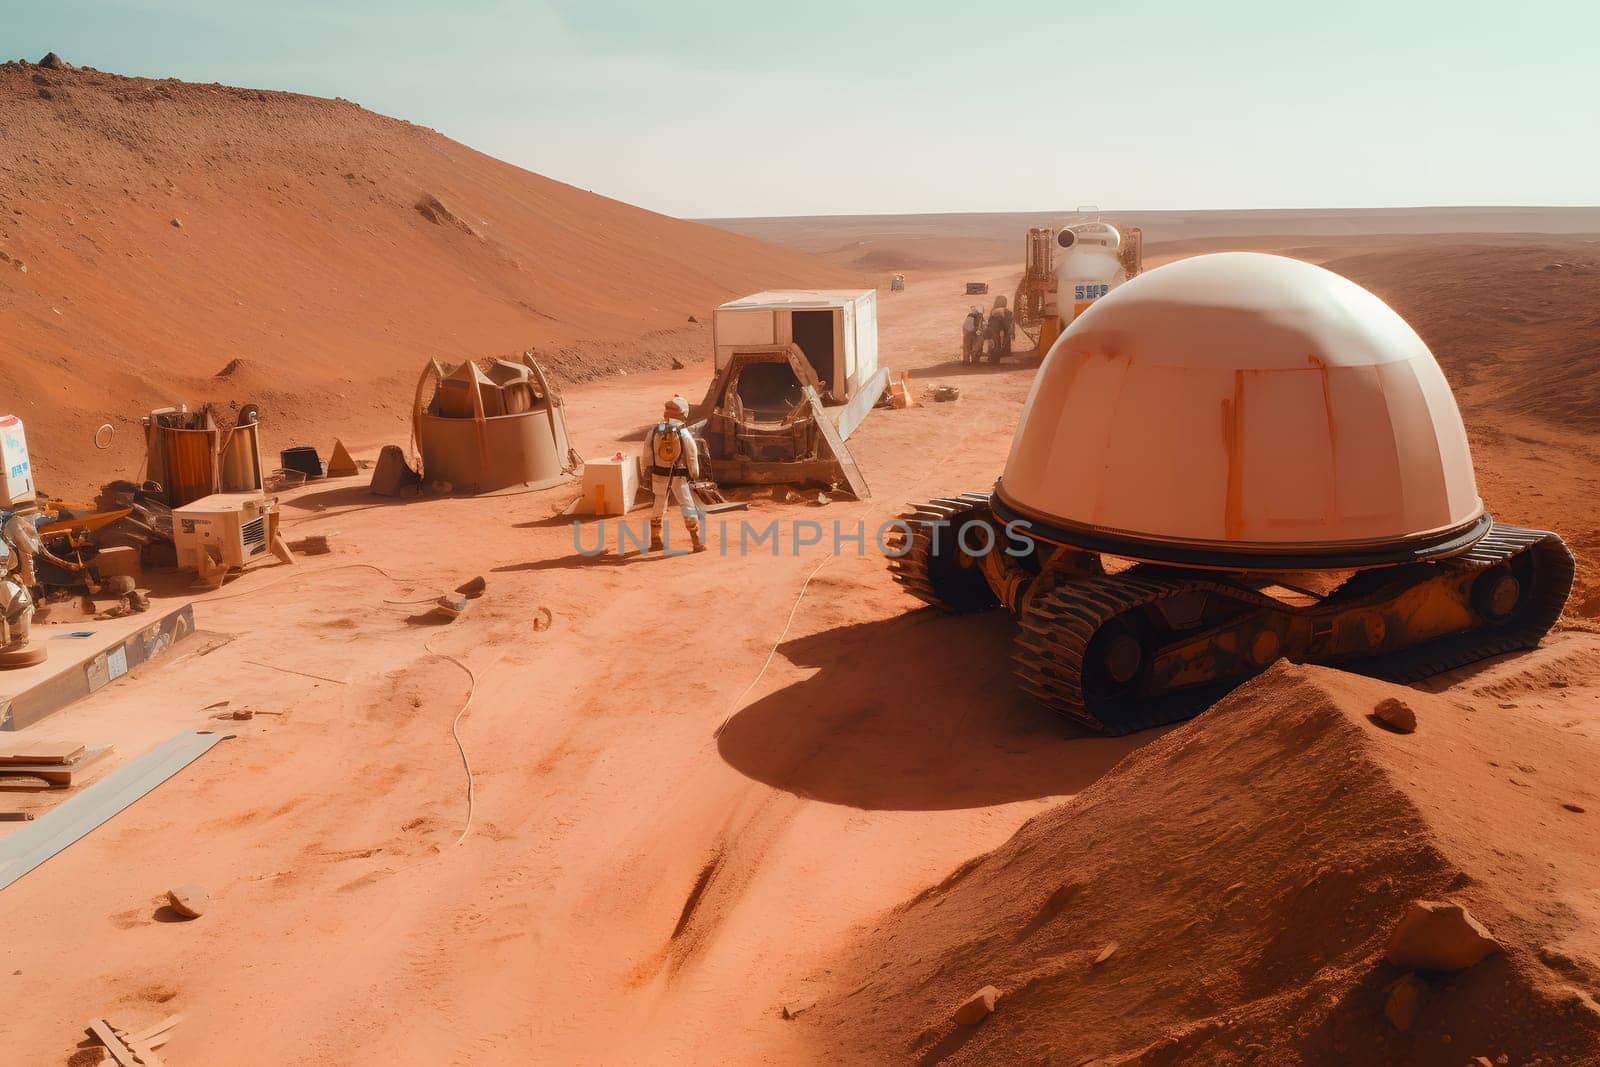 construction site on Mars planet surface, neural network generated photorealistic image by z1b